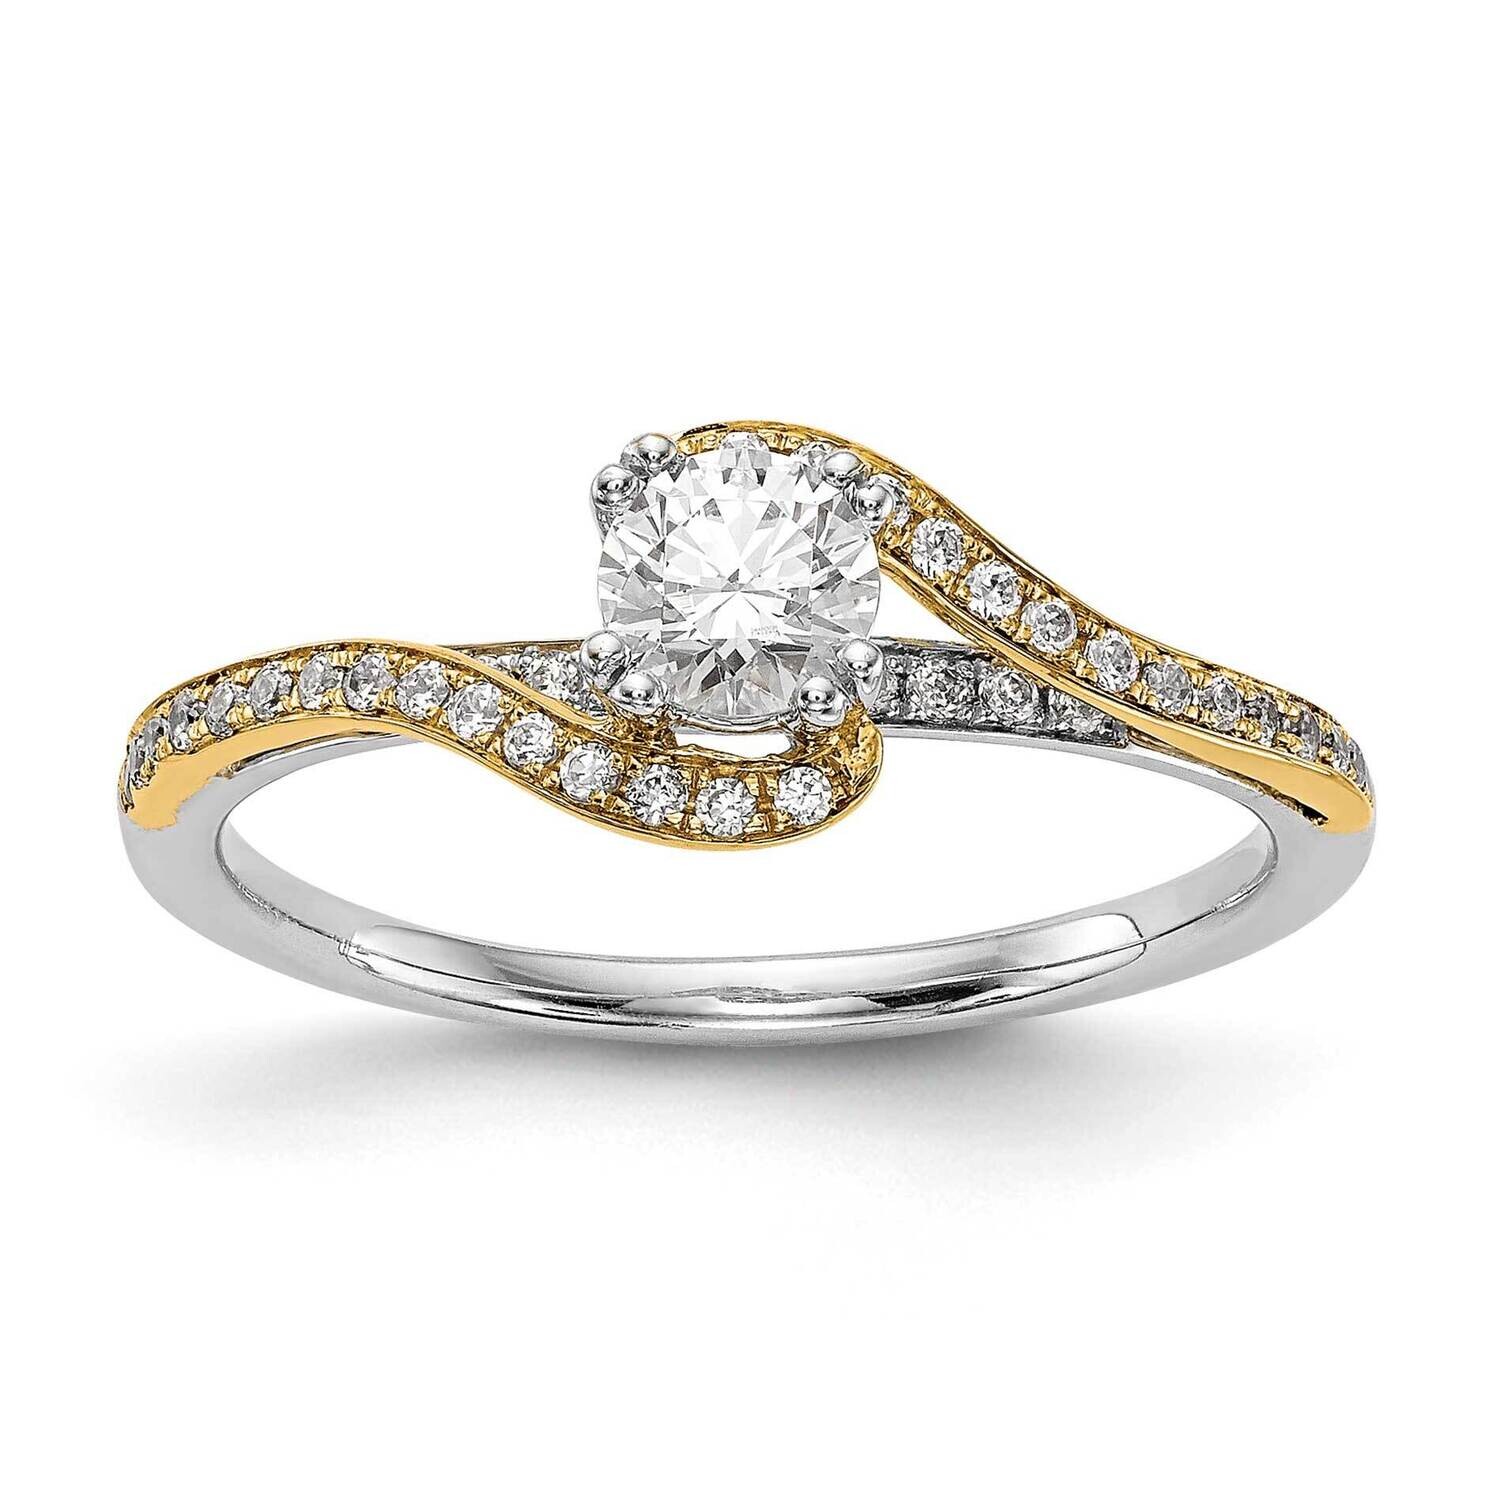 By-Pass Holds 1/3 Carat 4.5mm Round Center 1/6 Carat Diamond Semi-Mount Engagement Ring 14k Two-Tone Gold RM2409E-033-YWAA